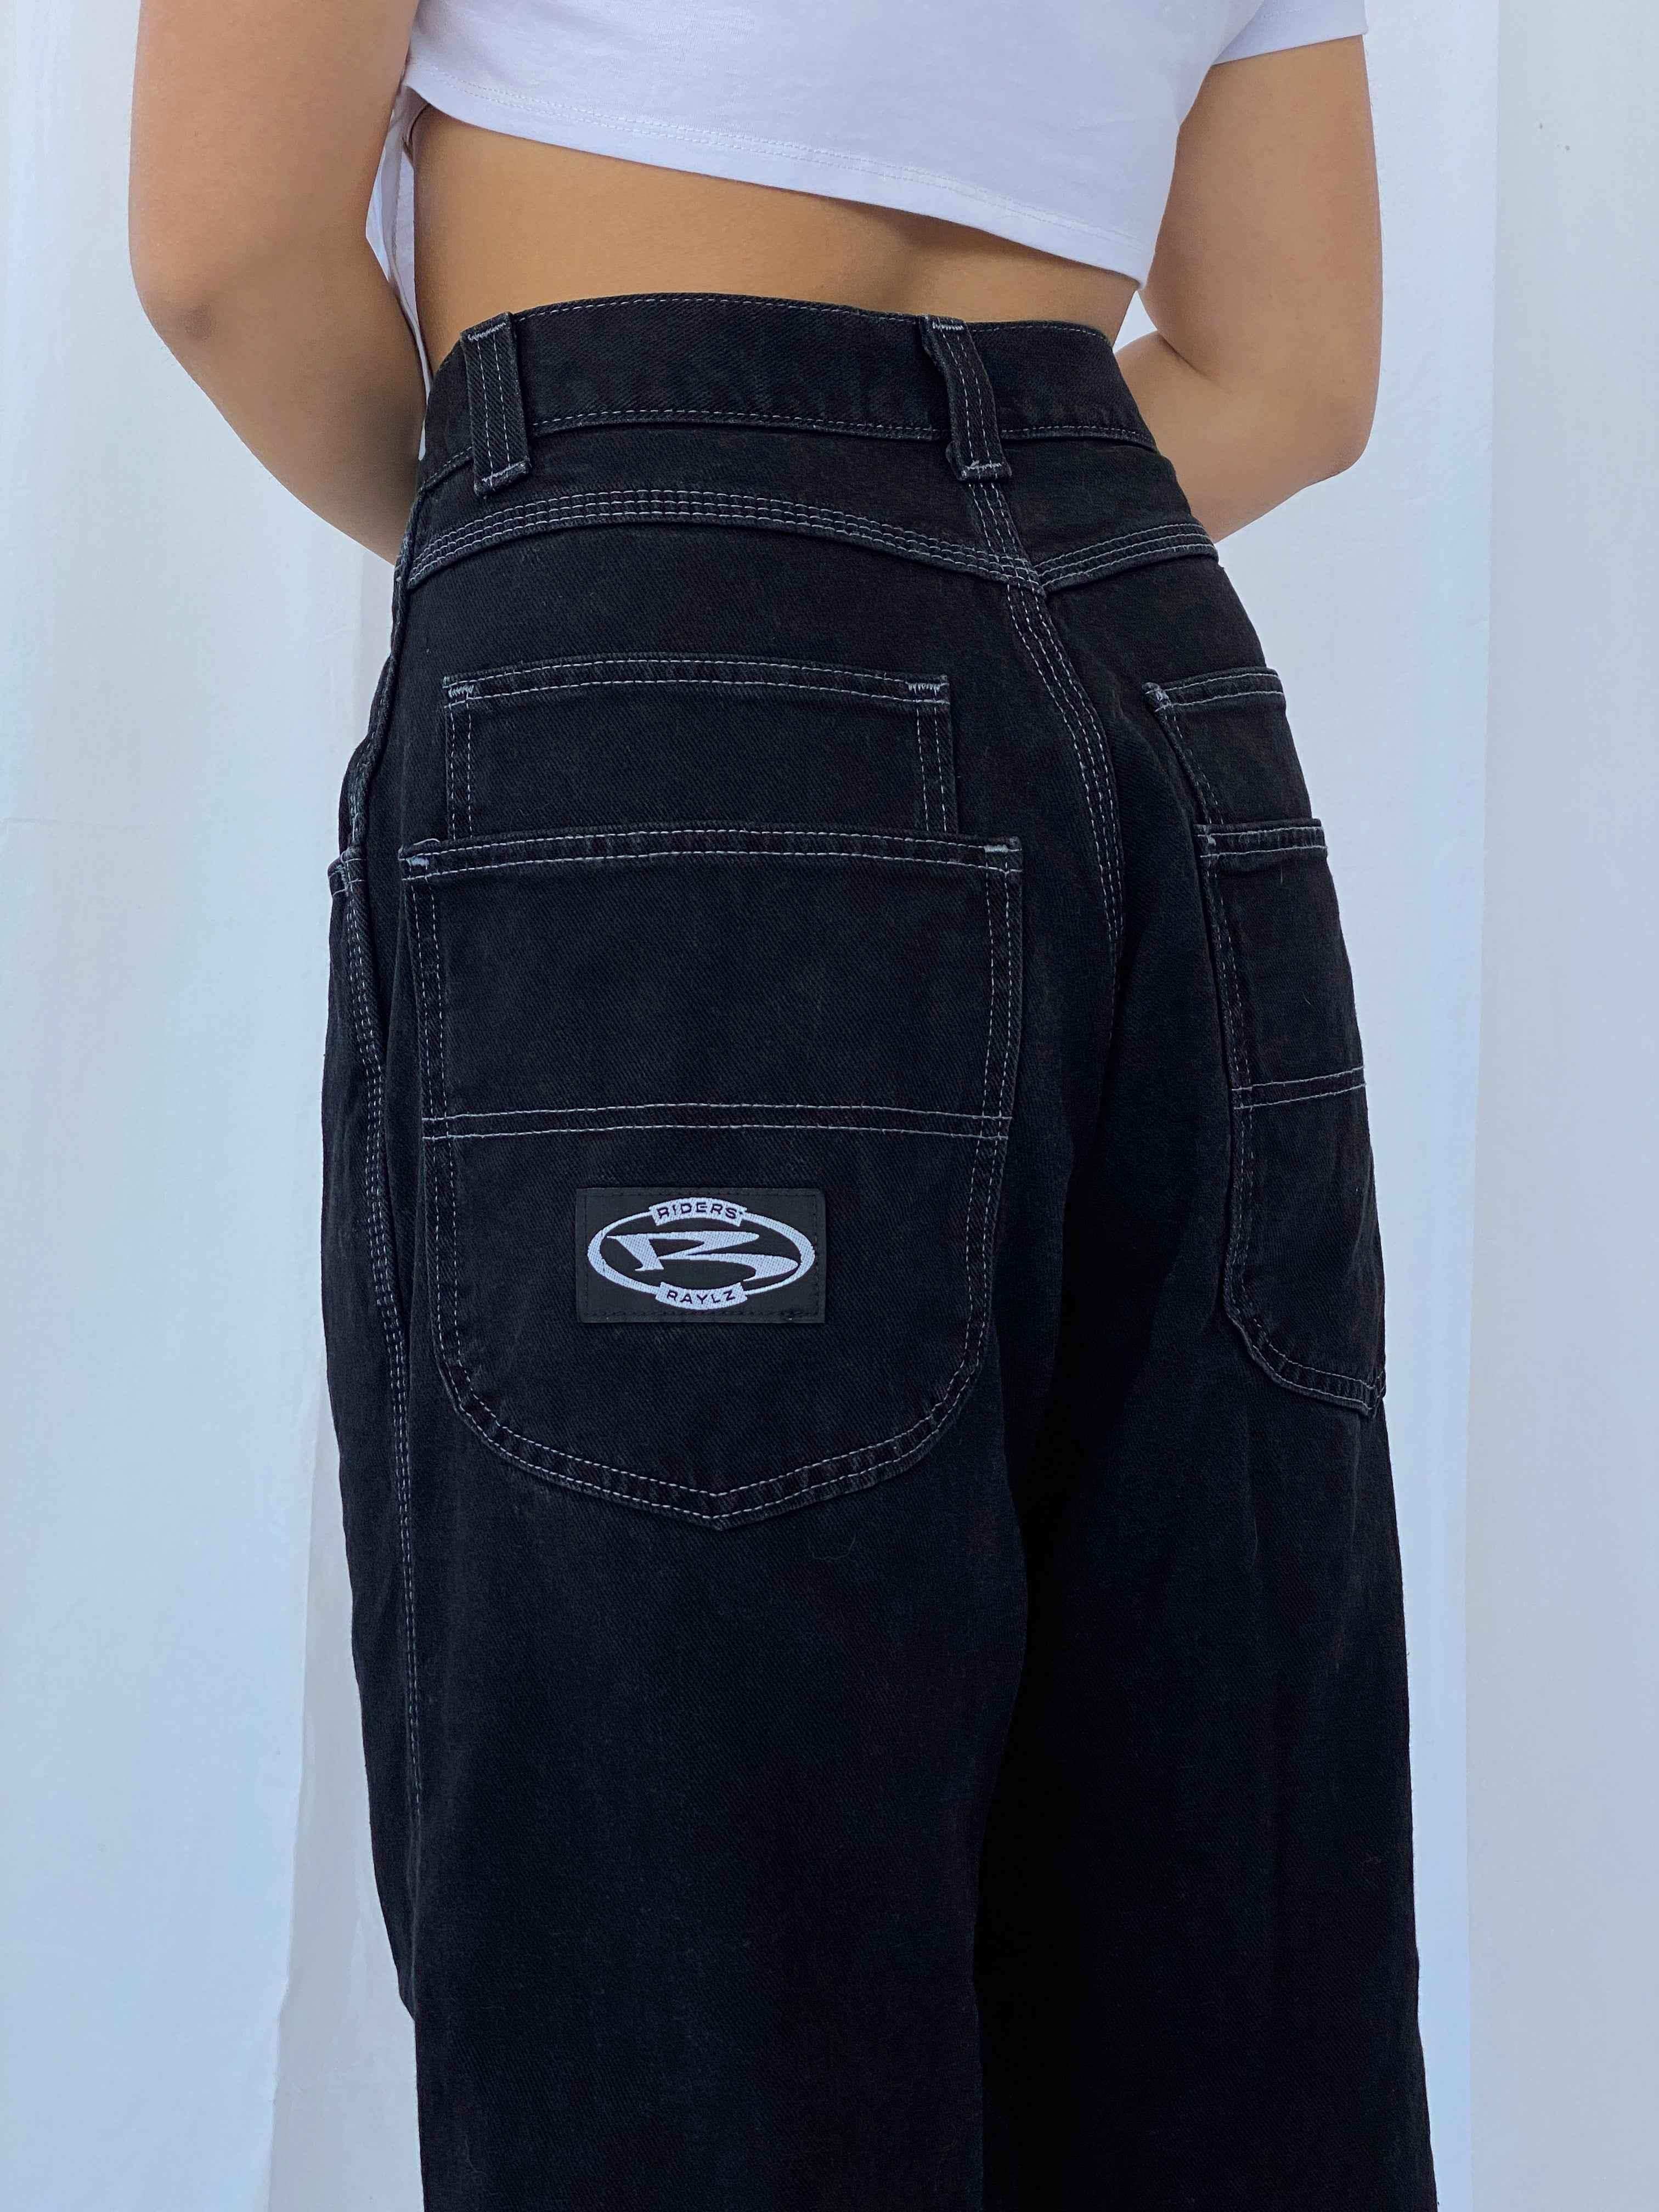 JNCO or Lee Pipes? - Only 90's Kids Know | Facebook